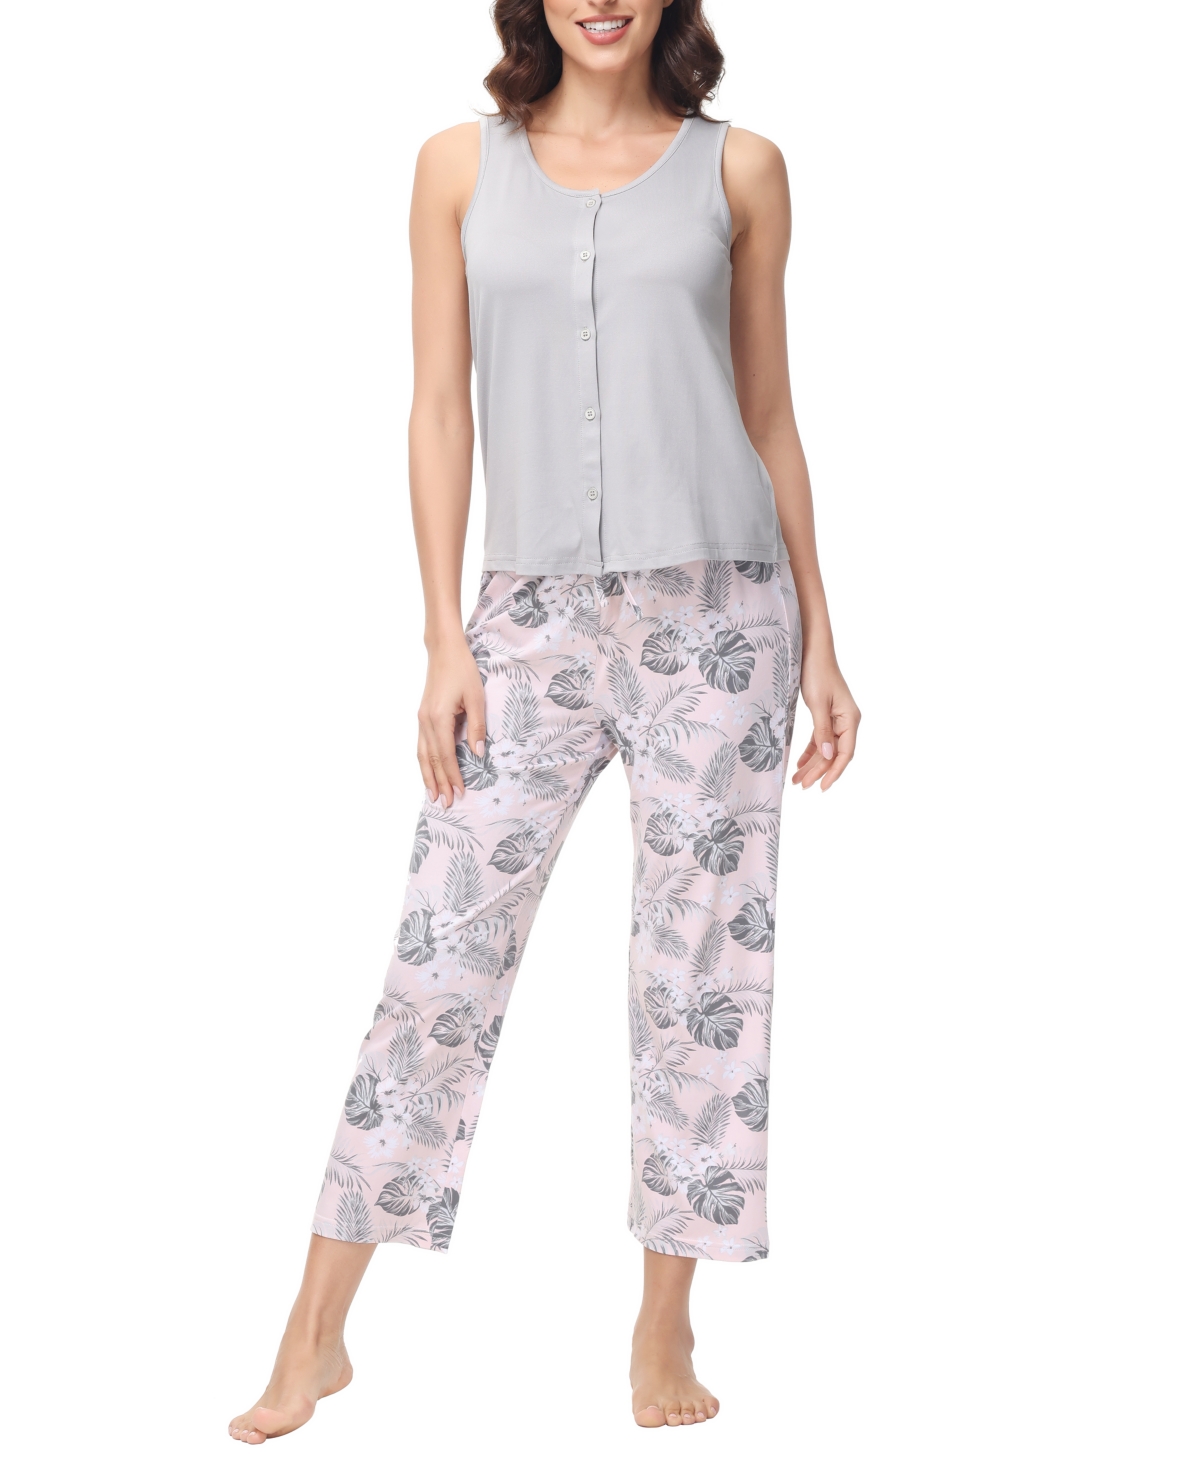 Women's 2 Piece Button Down Top with Cropped Wide Leg Pants Pajama Set - Sweet Palm